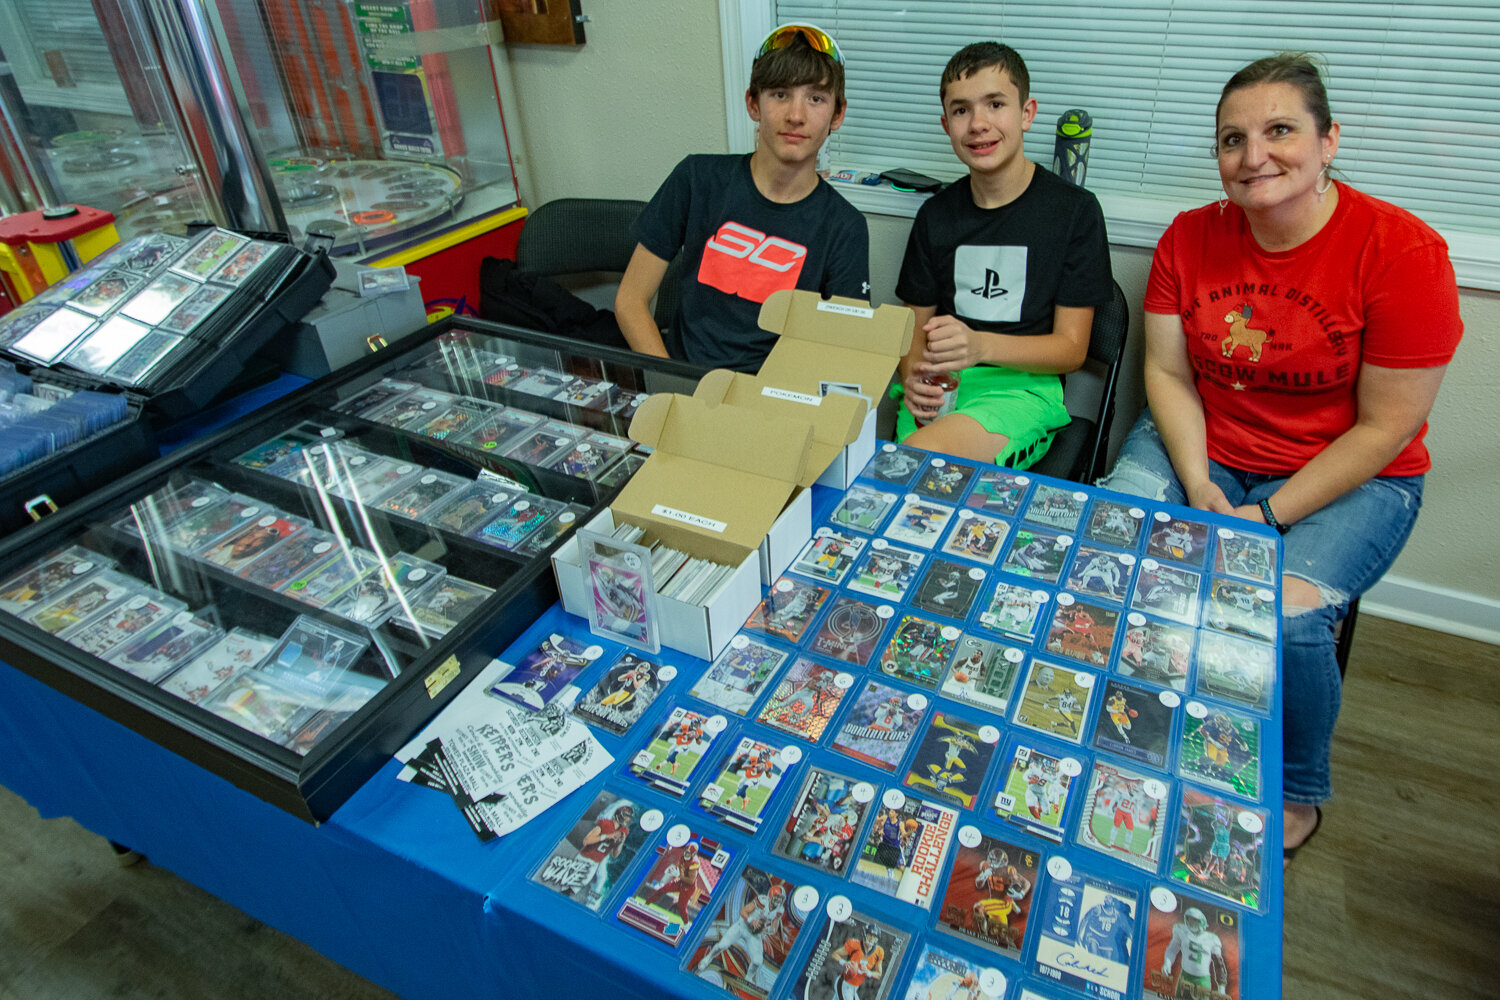 From left, Kolson Otis, of Mossyrock, Aiden Combs, of Roy, and Carrie Anderson, of Mossyrock, sit behind their table selling sports cards on Saturday, Sept. 2 at the inaugural Keiper's Cards and Memorabilia Show at the Tower Mall, located at 320 N. Tower Ave.